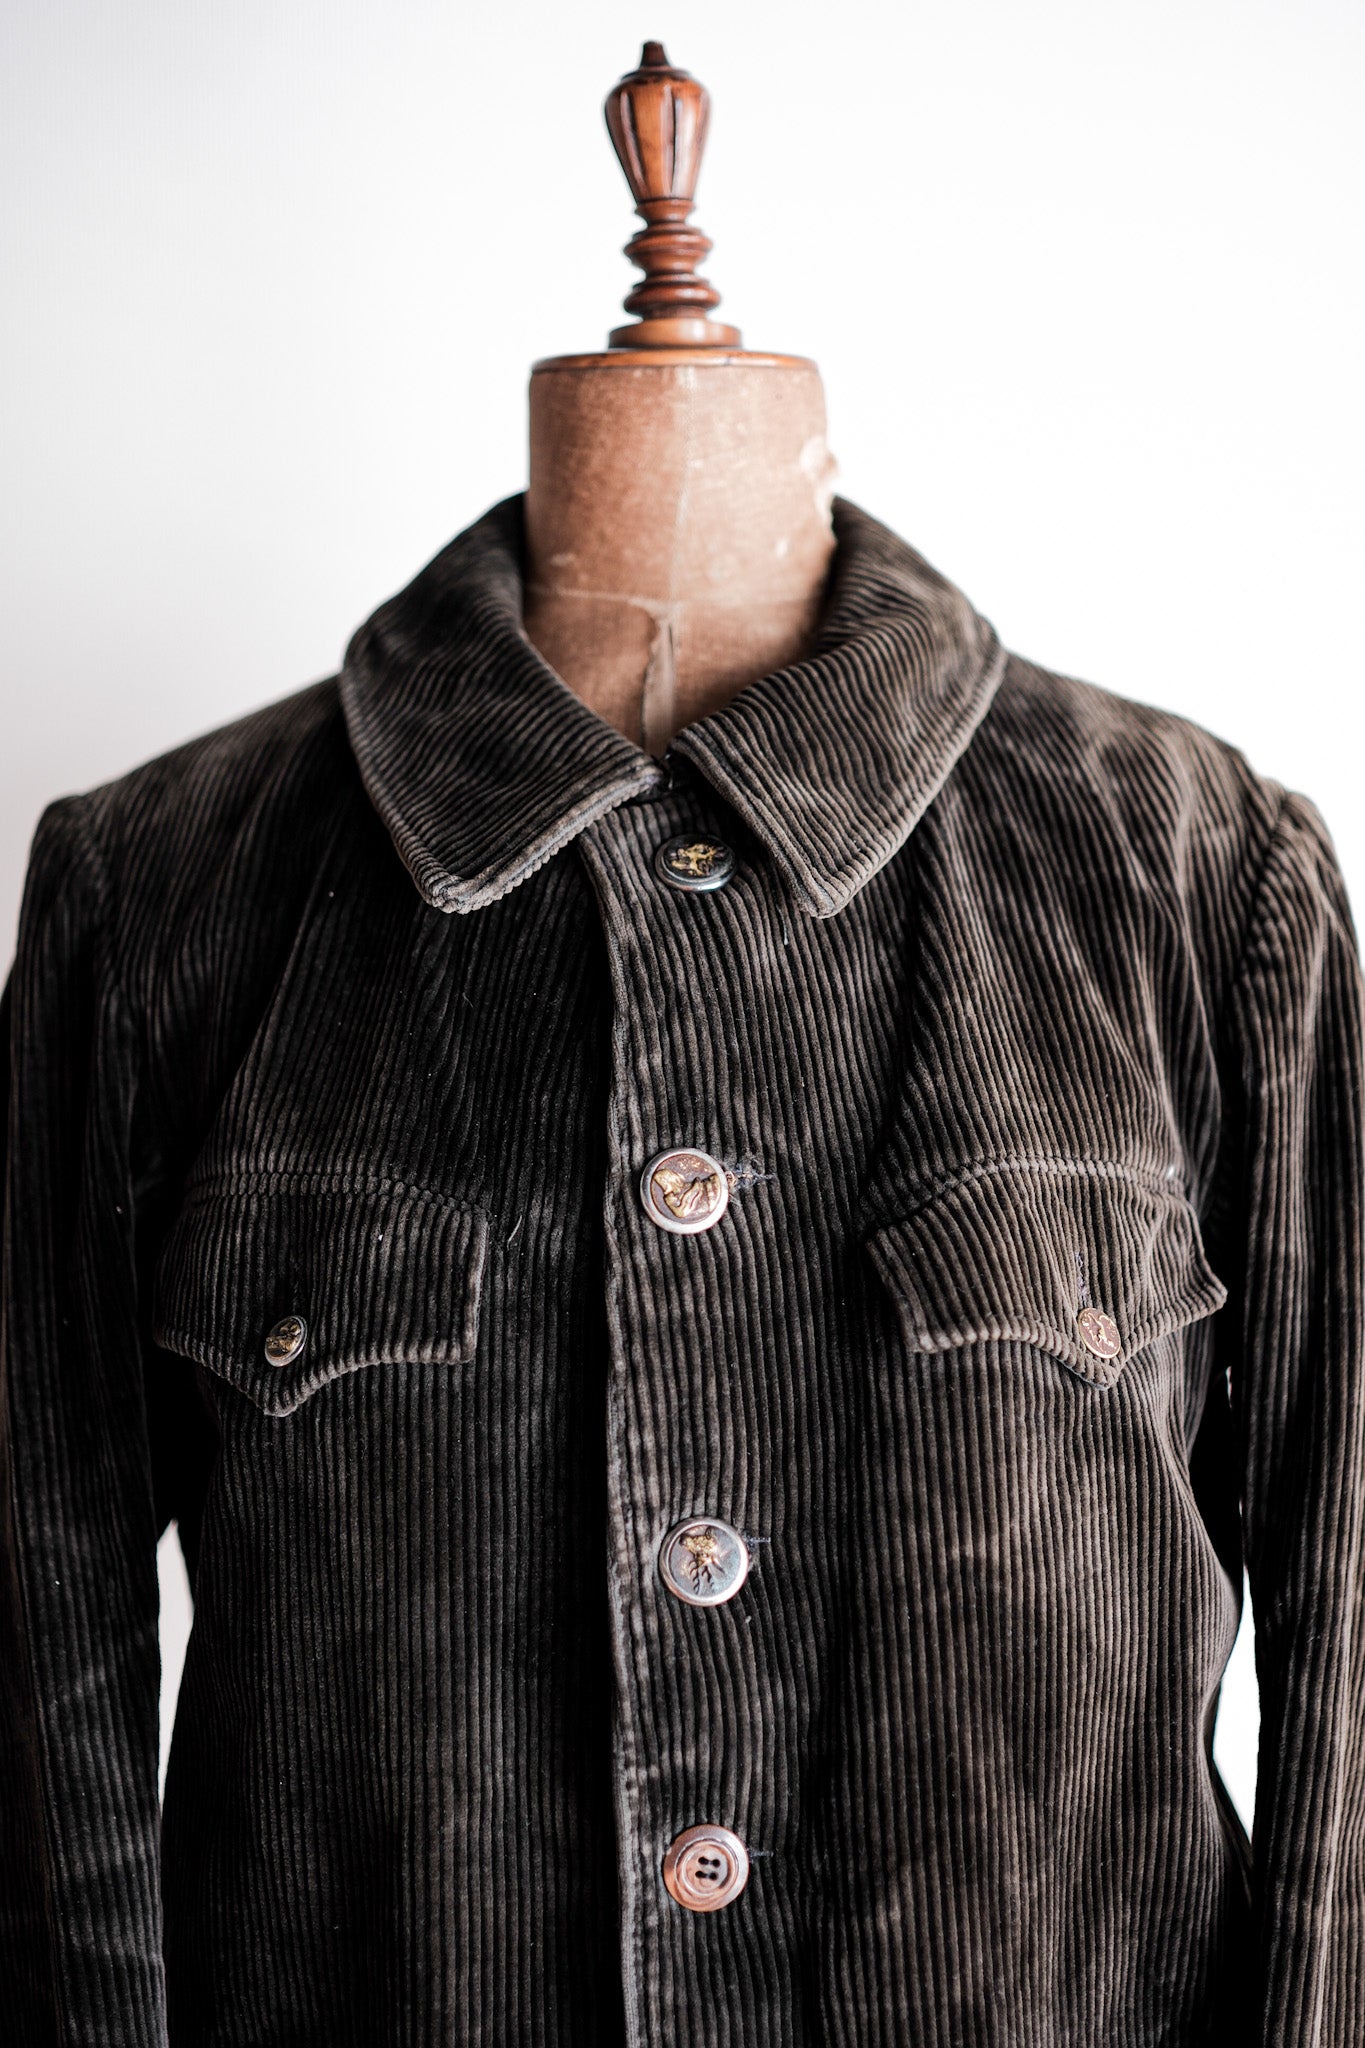 40s〜50s French hunting jacket　【vintage】20s